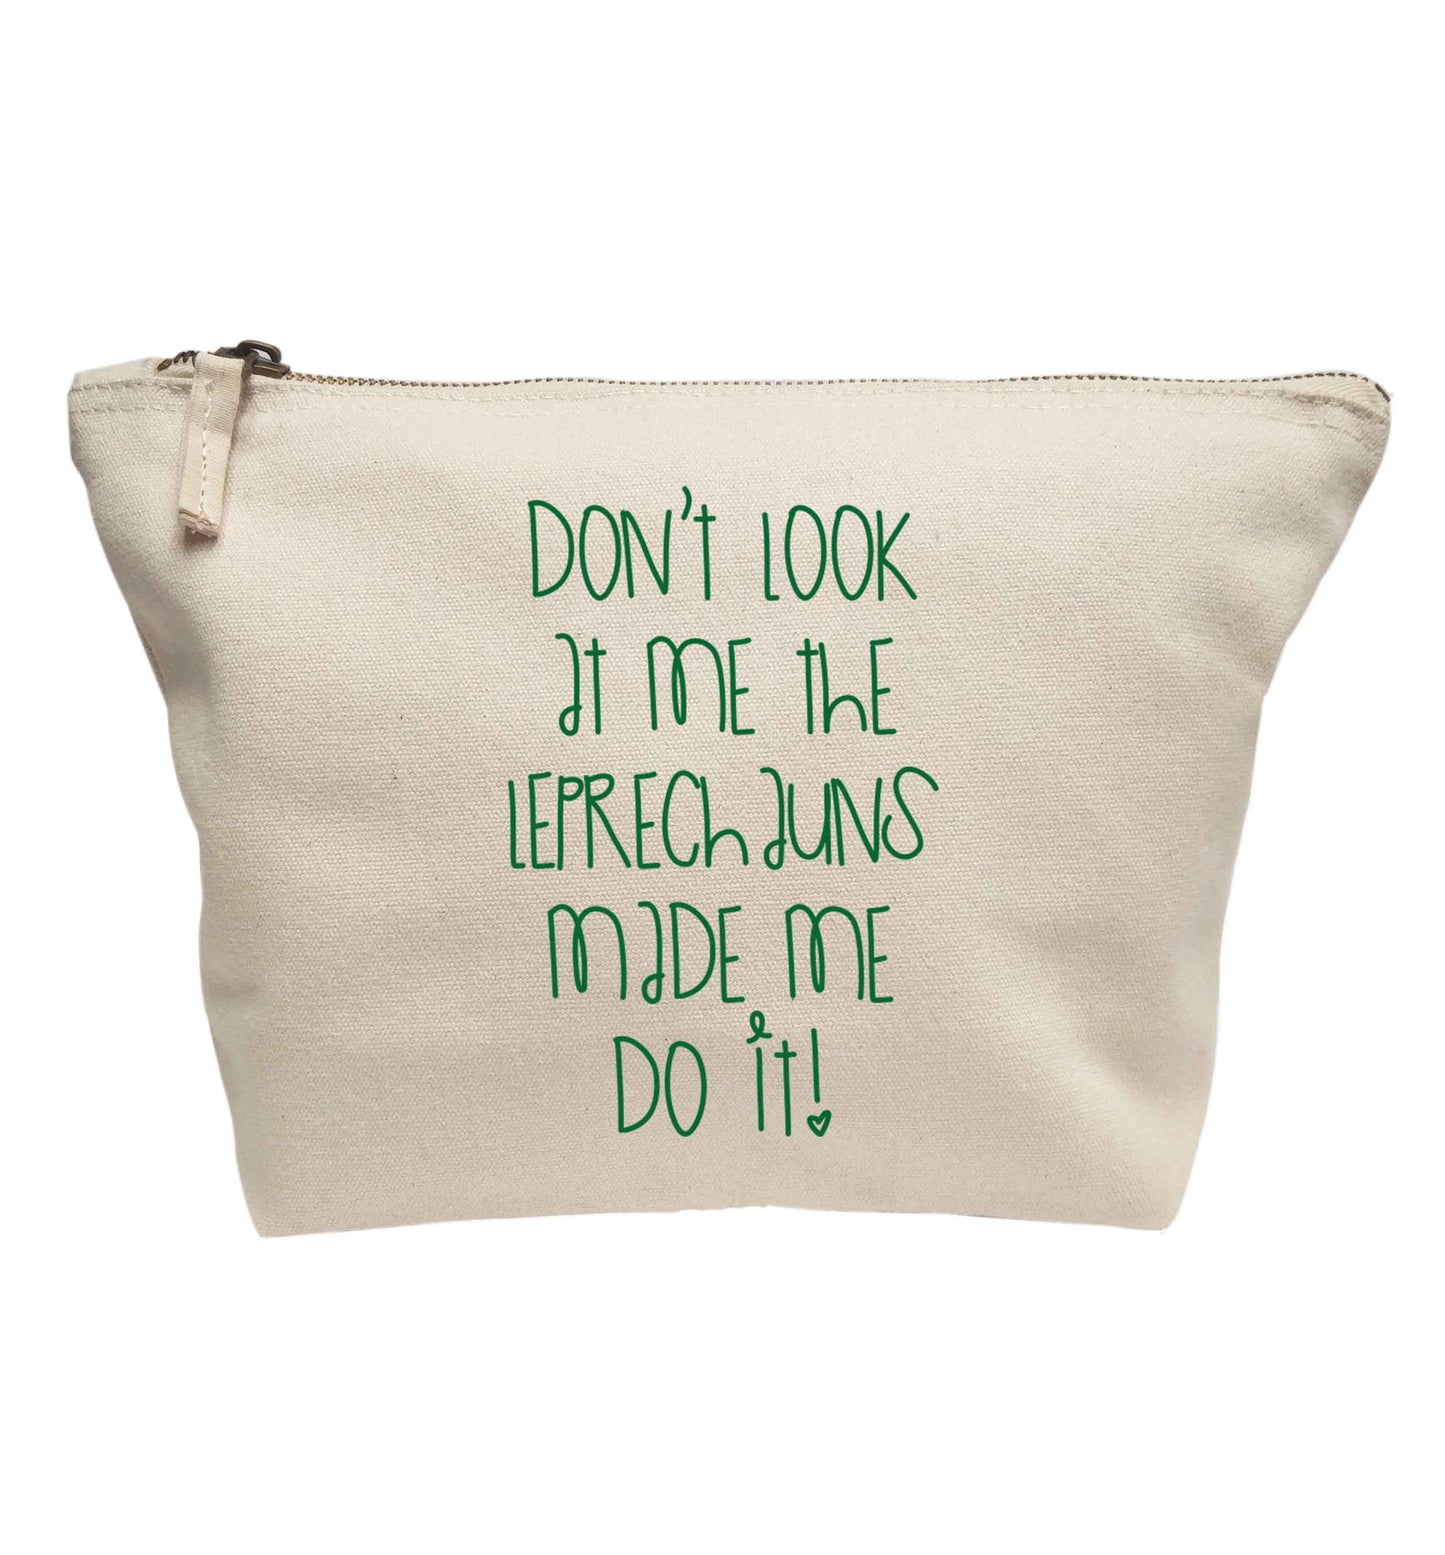 Don't look at me the leprechauns made me do it | Makeup / wash bag